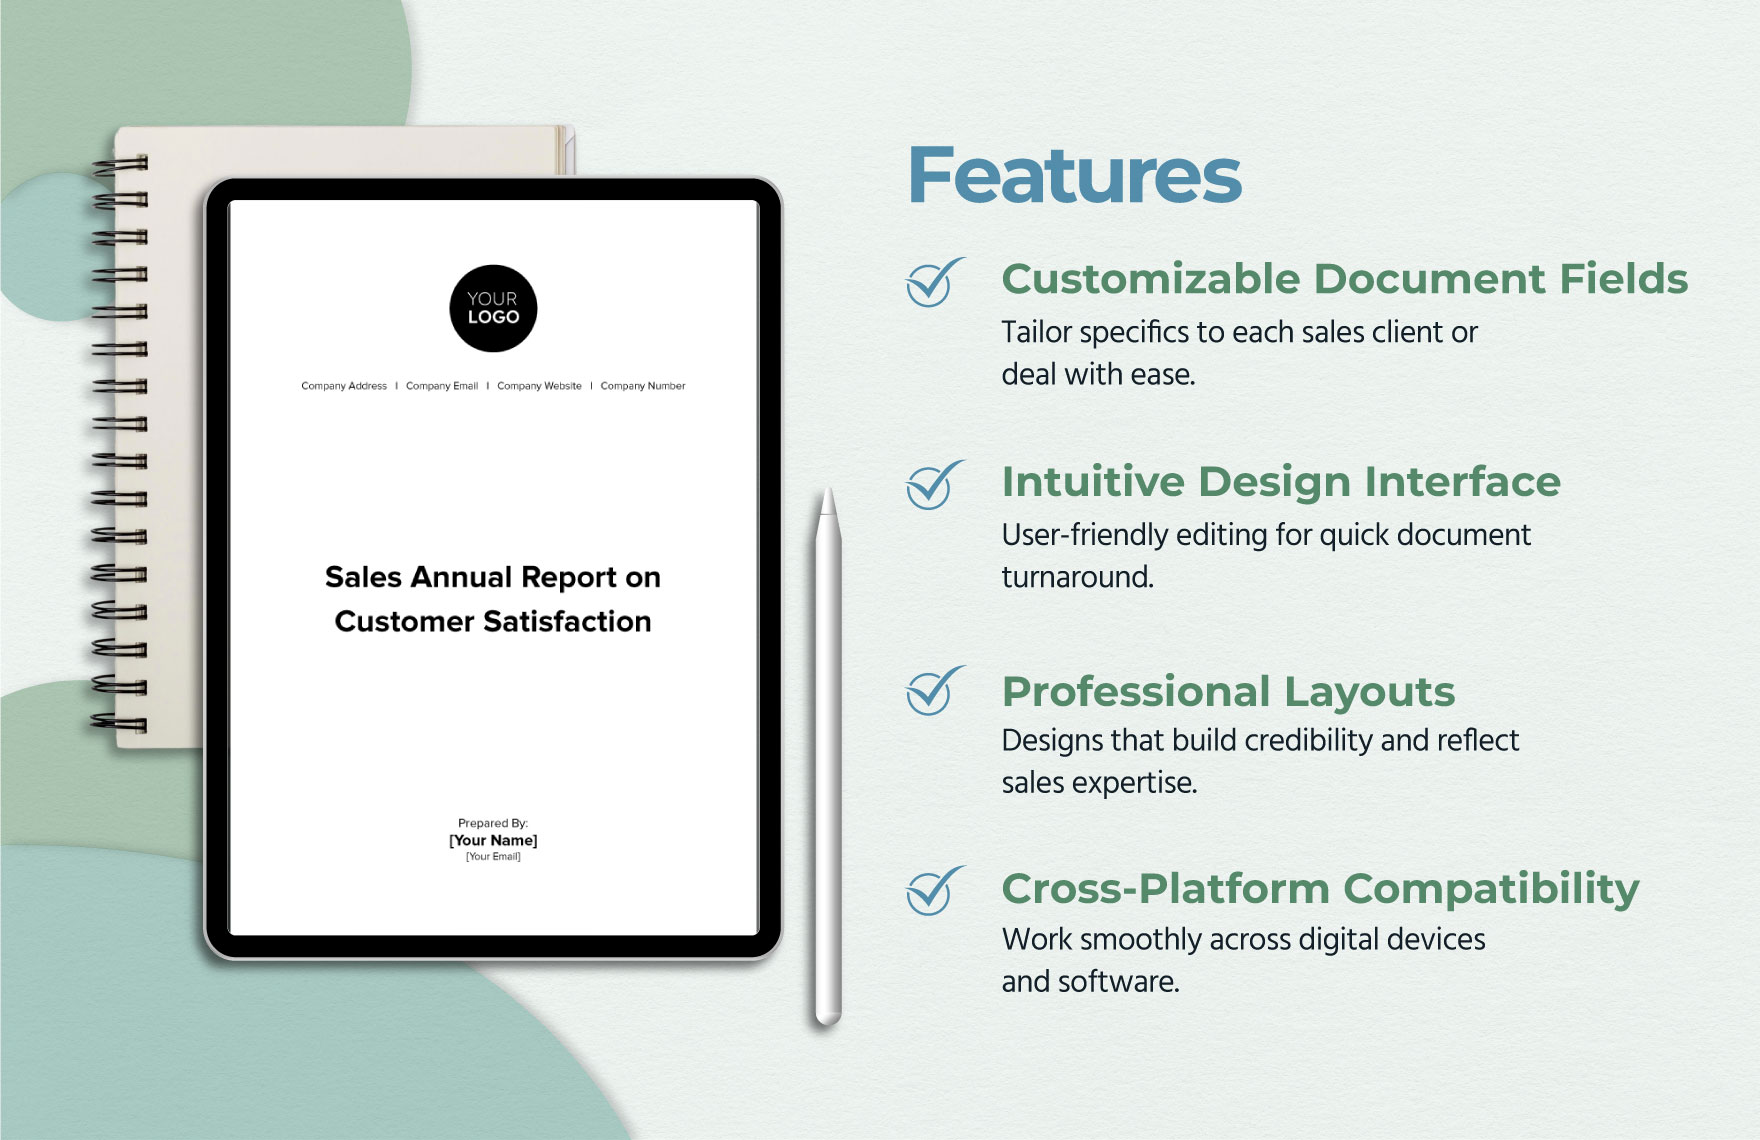 Sales Annual Report on Customer Satisfaction Template